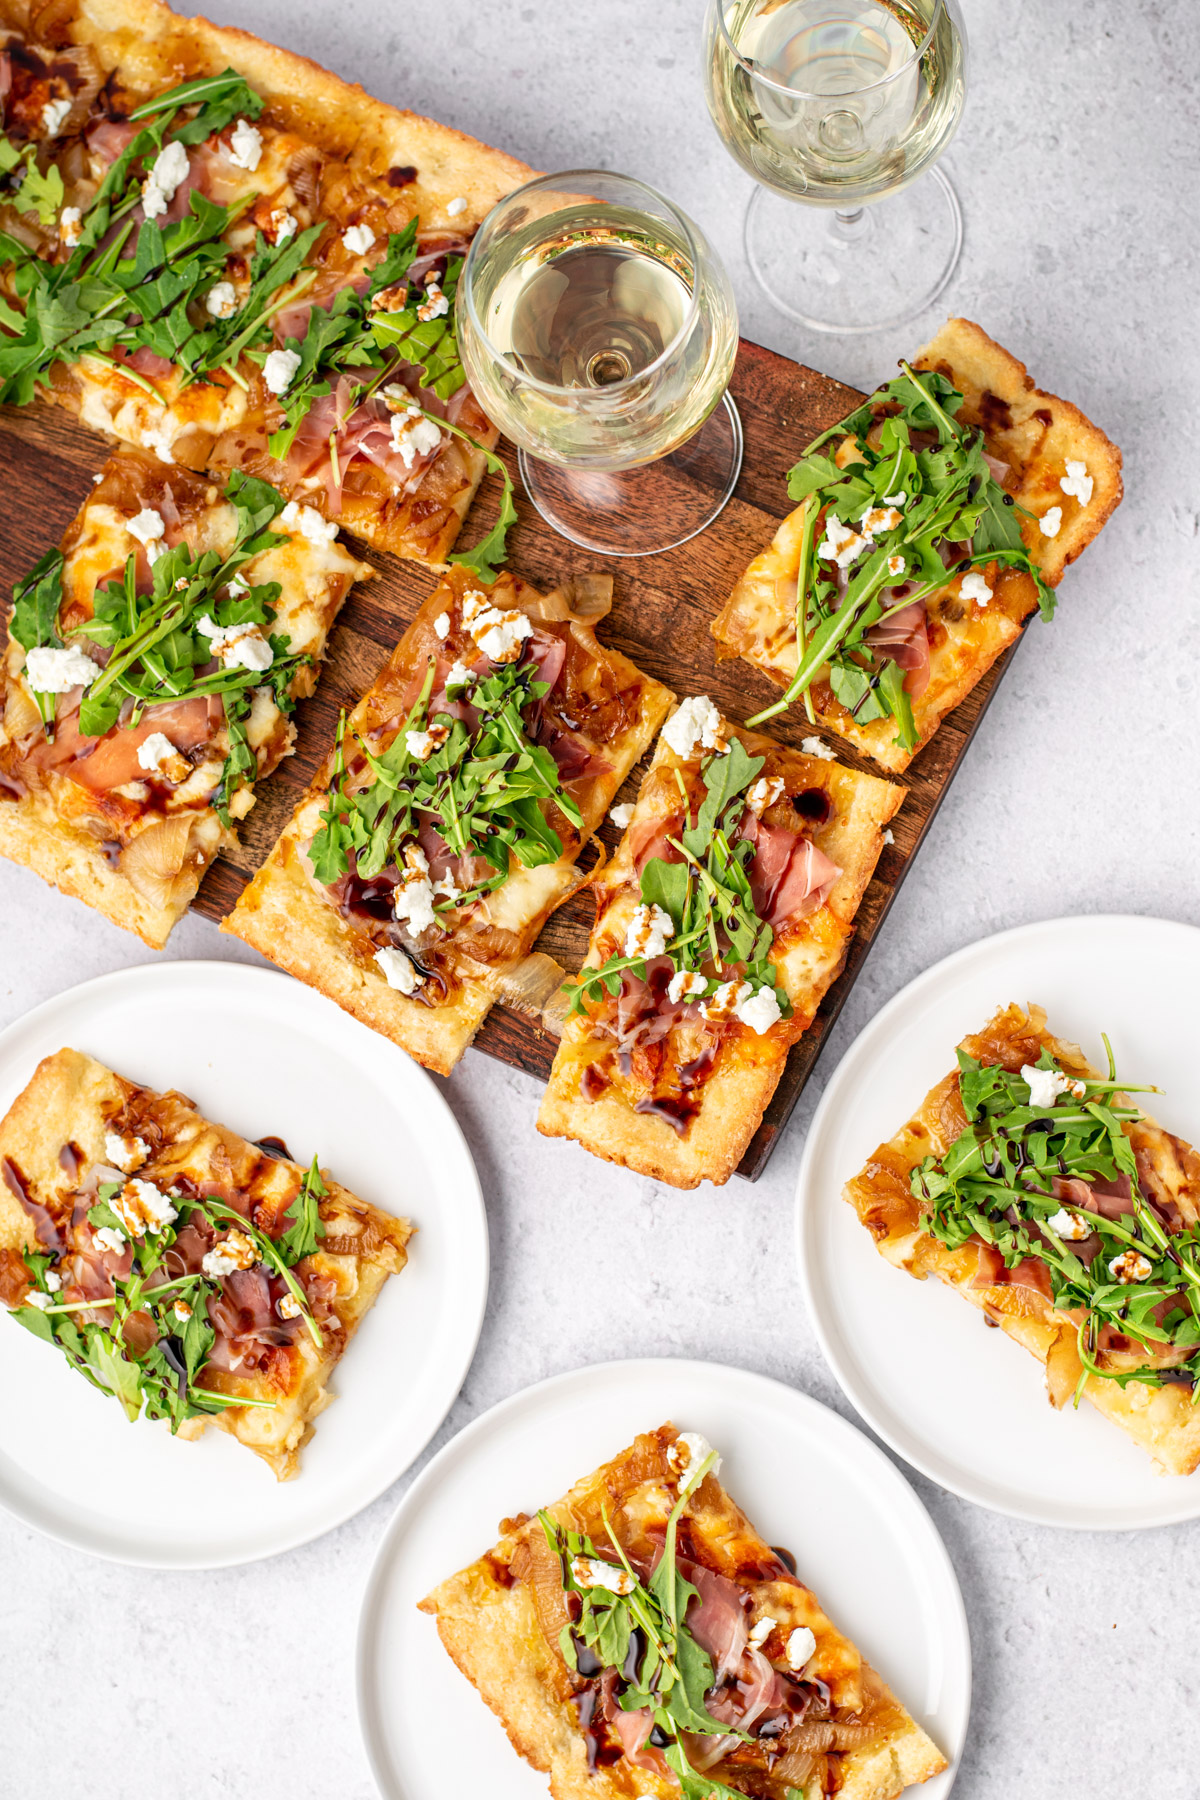 top view of pizza slices on a wood board, plates, and wine glasses